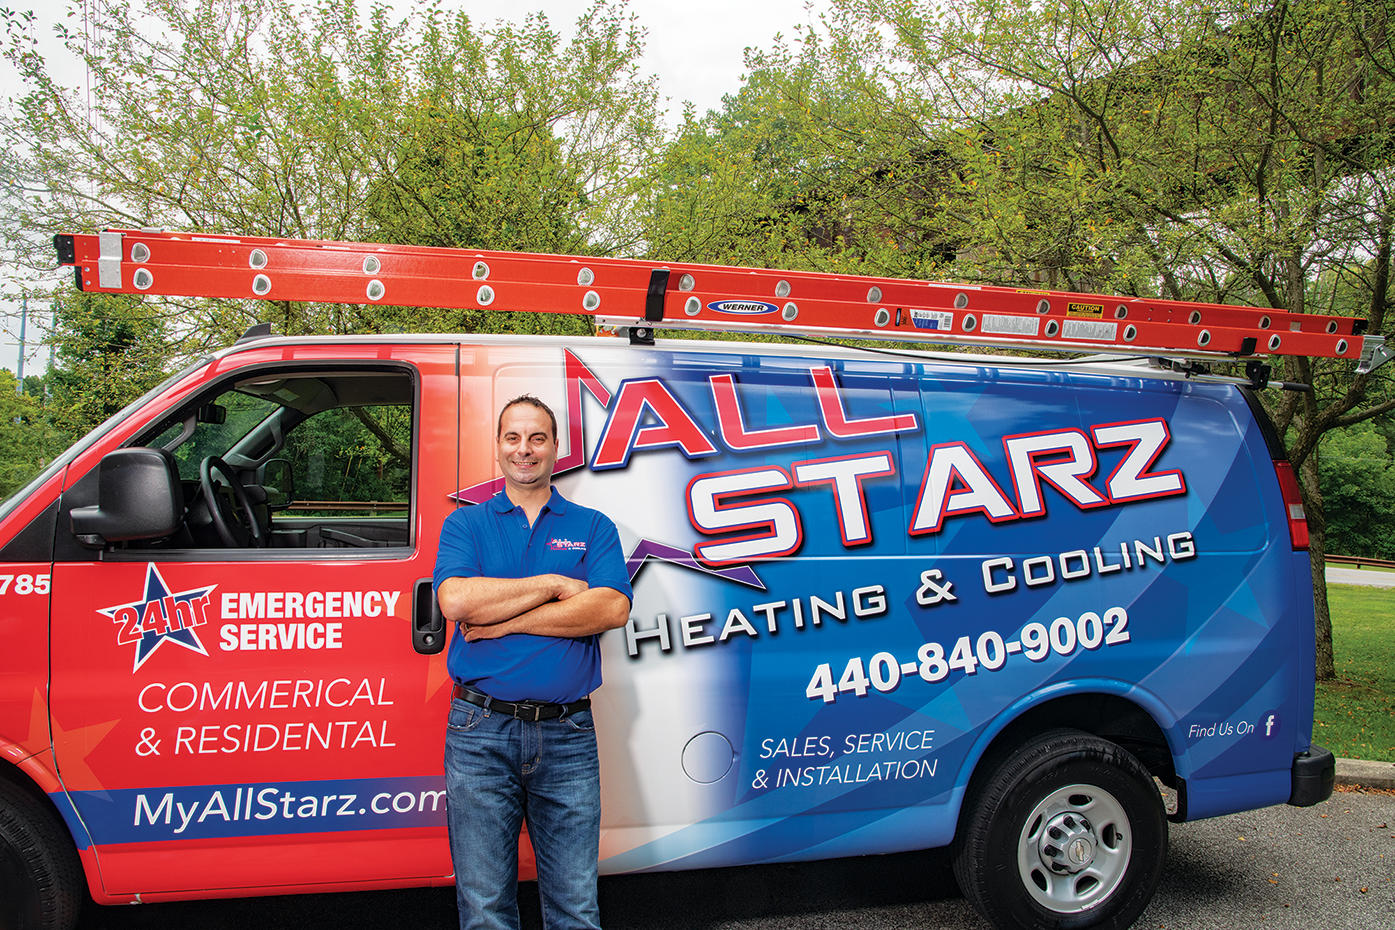 As a reliable HVAC contractor with 20-plus years experience, our owner is hands-on. He not only quot All Starz Heating & Cooling, LLC Strongsville (440)840-9002